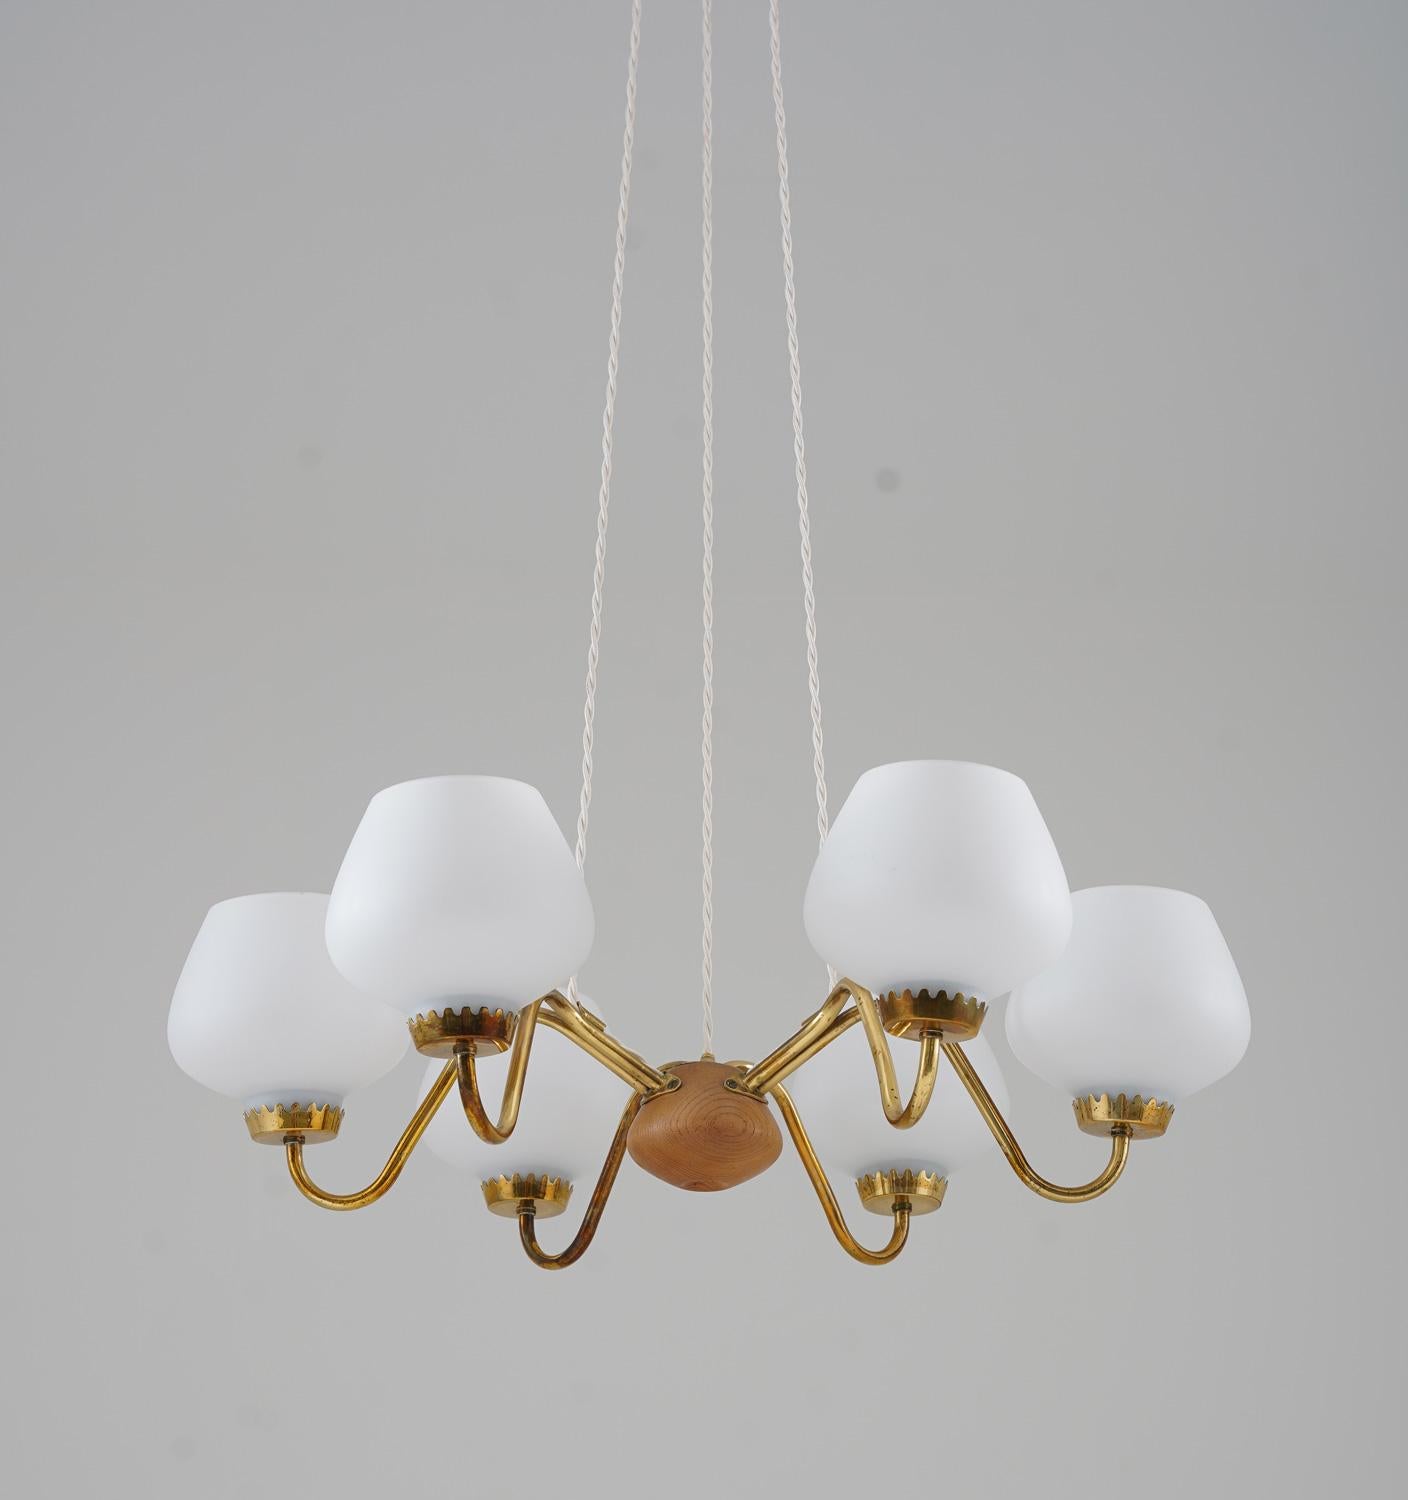 Midcentury pendants in brass, wood and frosted opaline glass manufactured by ASEA, Sweden, 1940s.
These great-looking pendants are made with high quality and great details. They feature six light sources, hidden by frosted opaline glass shades. The